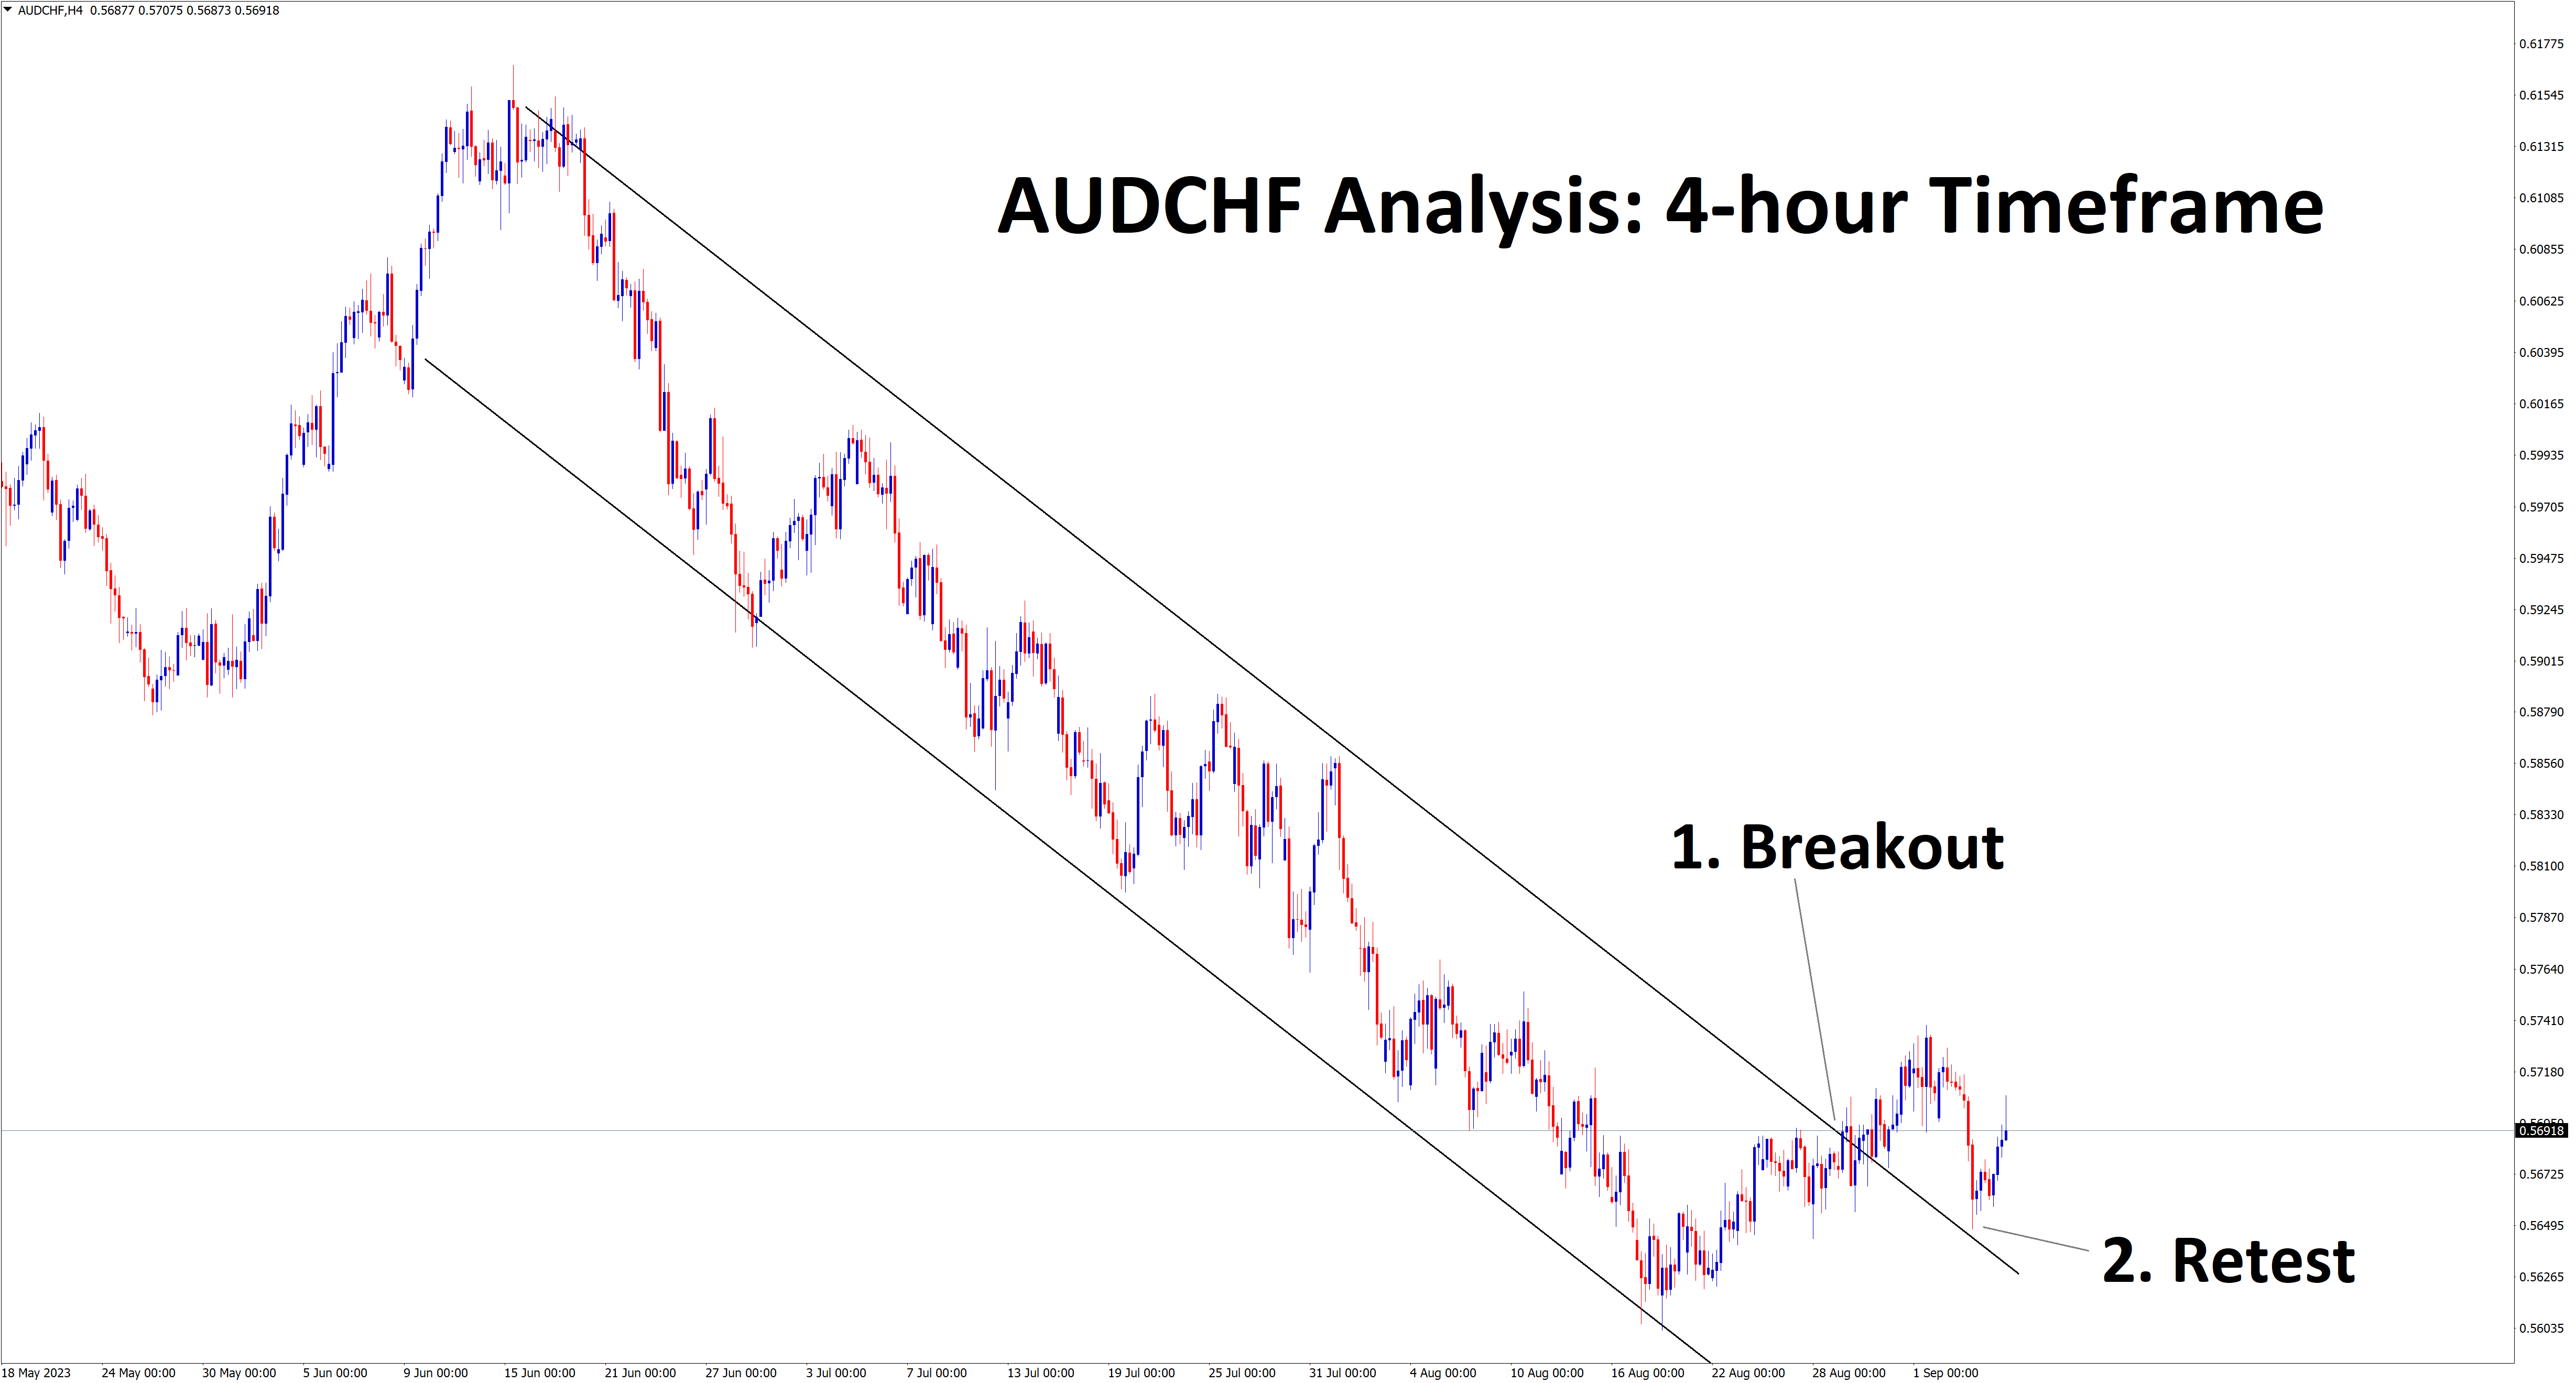 audchf is rebounding from the retest area